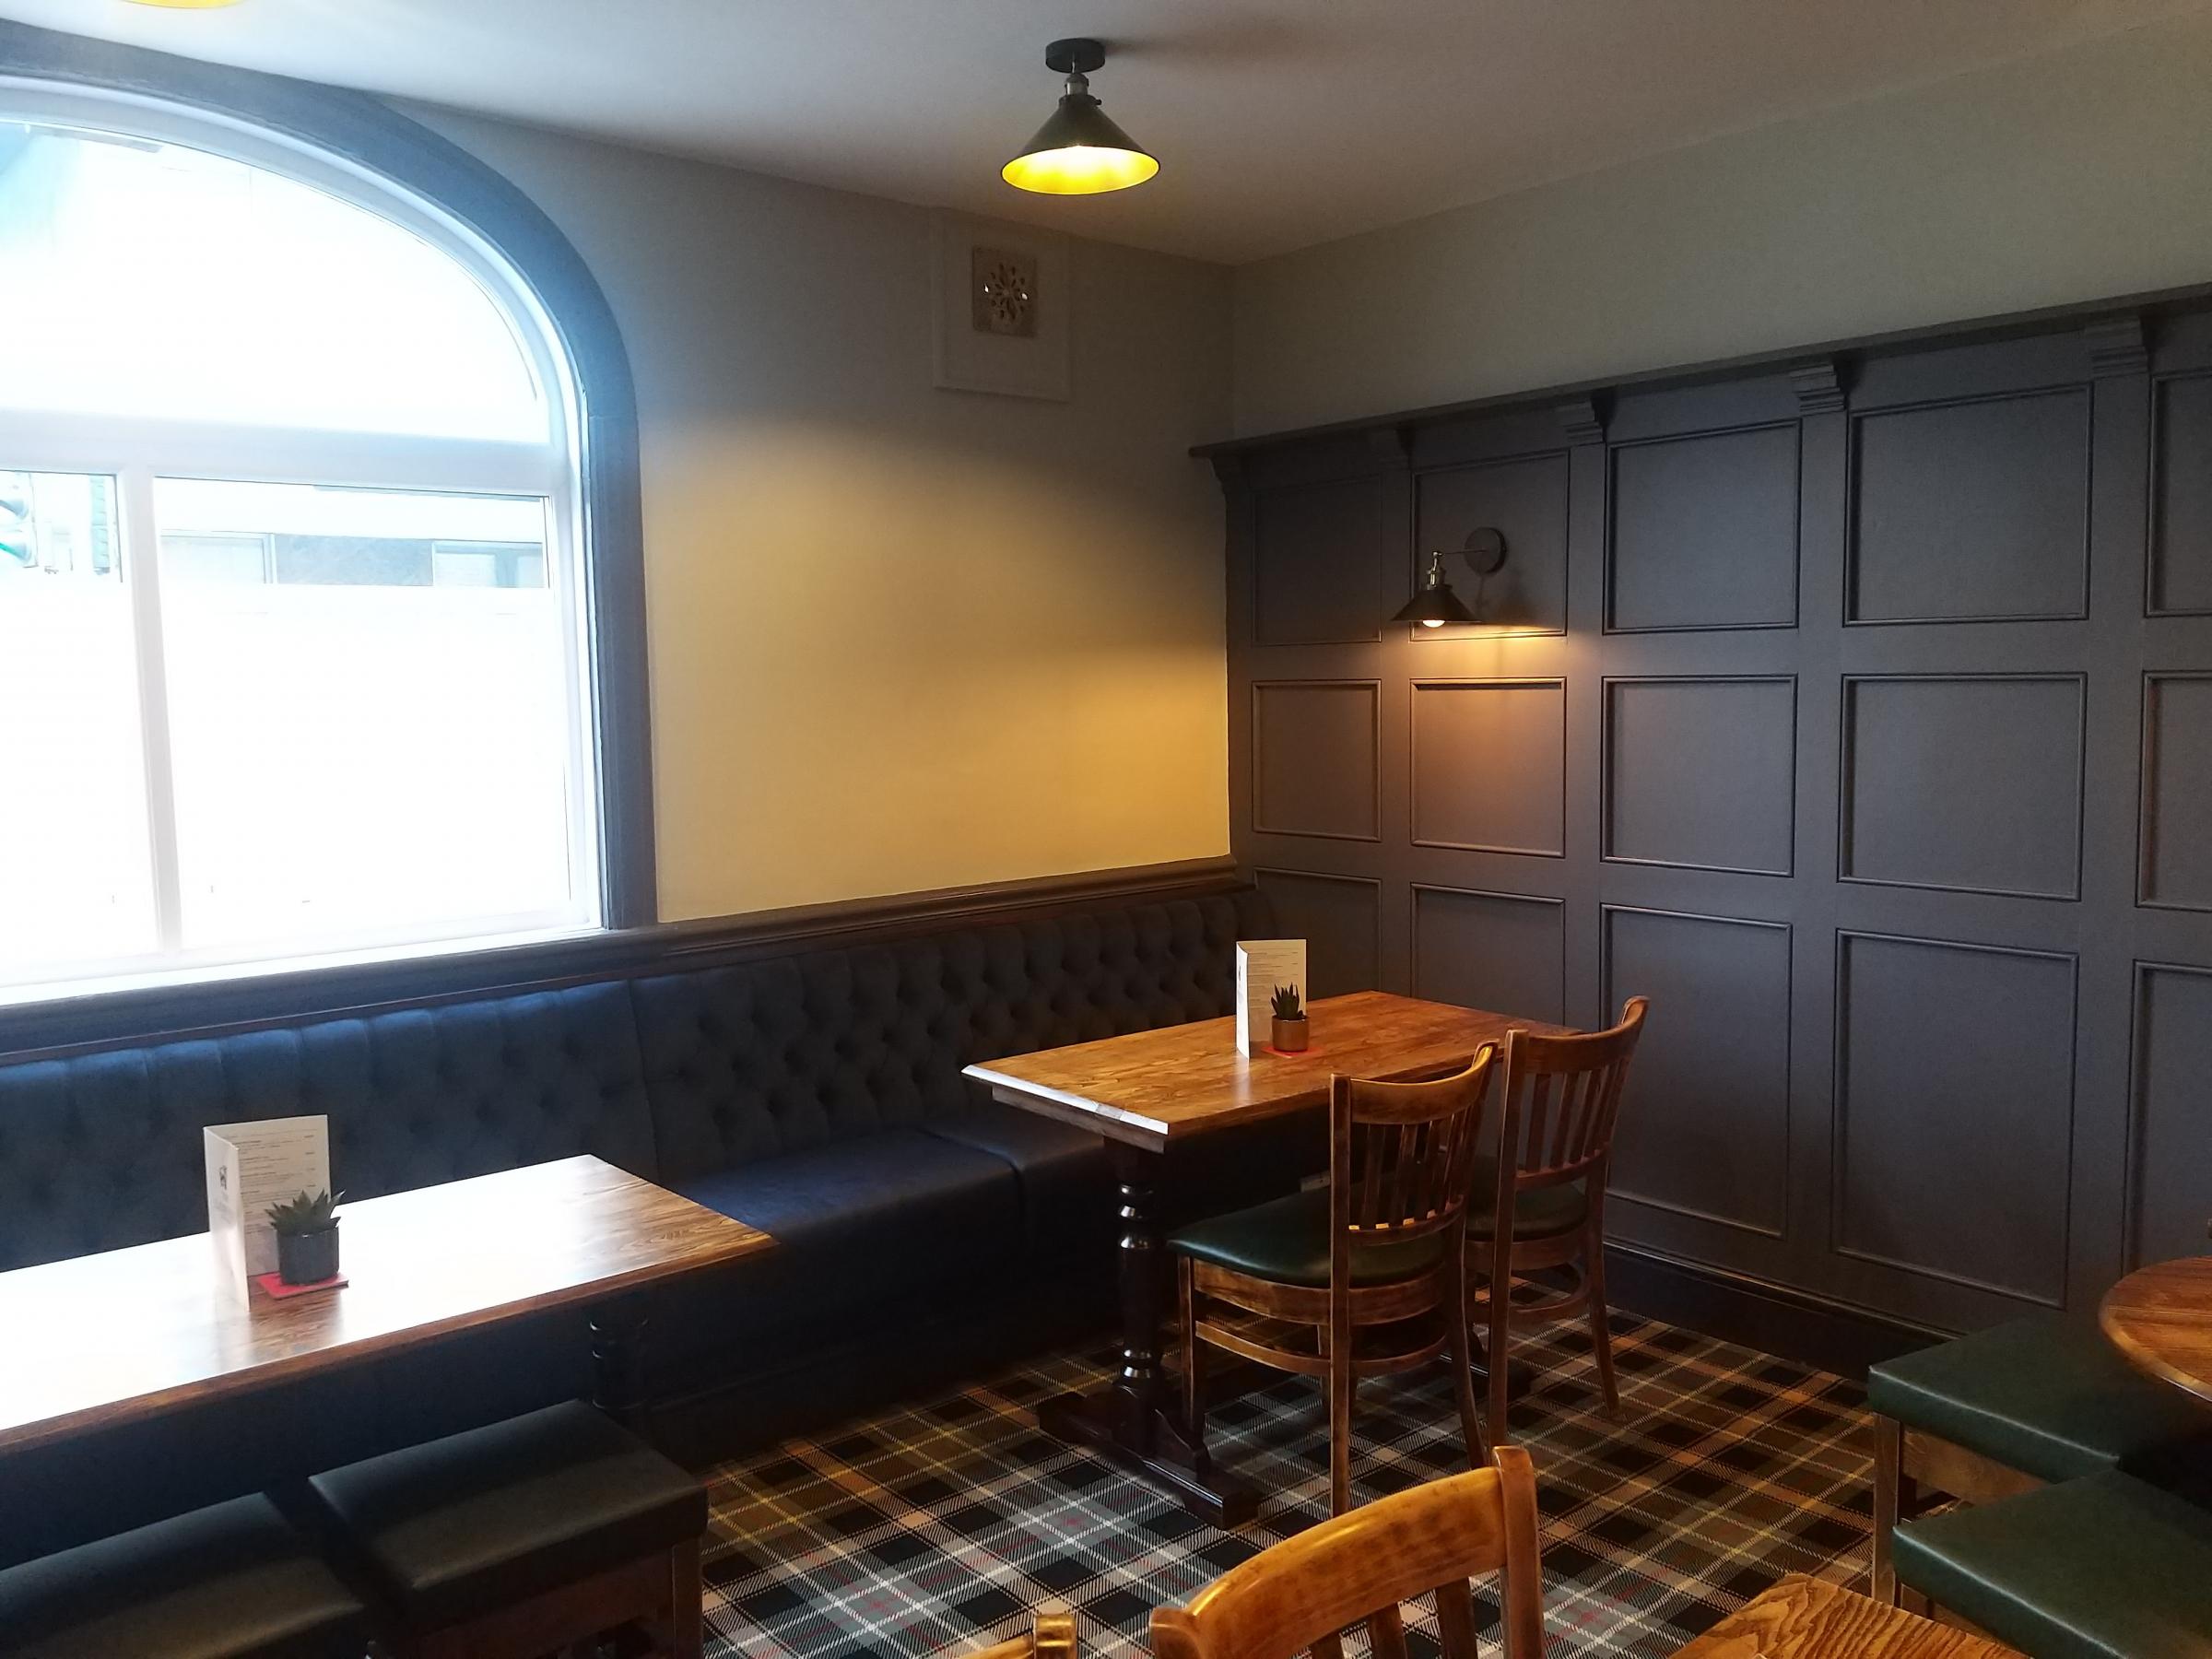 The renovated Lamb pub has reopened